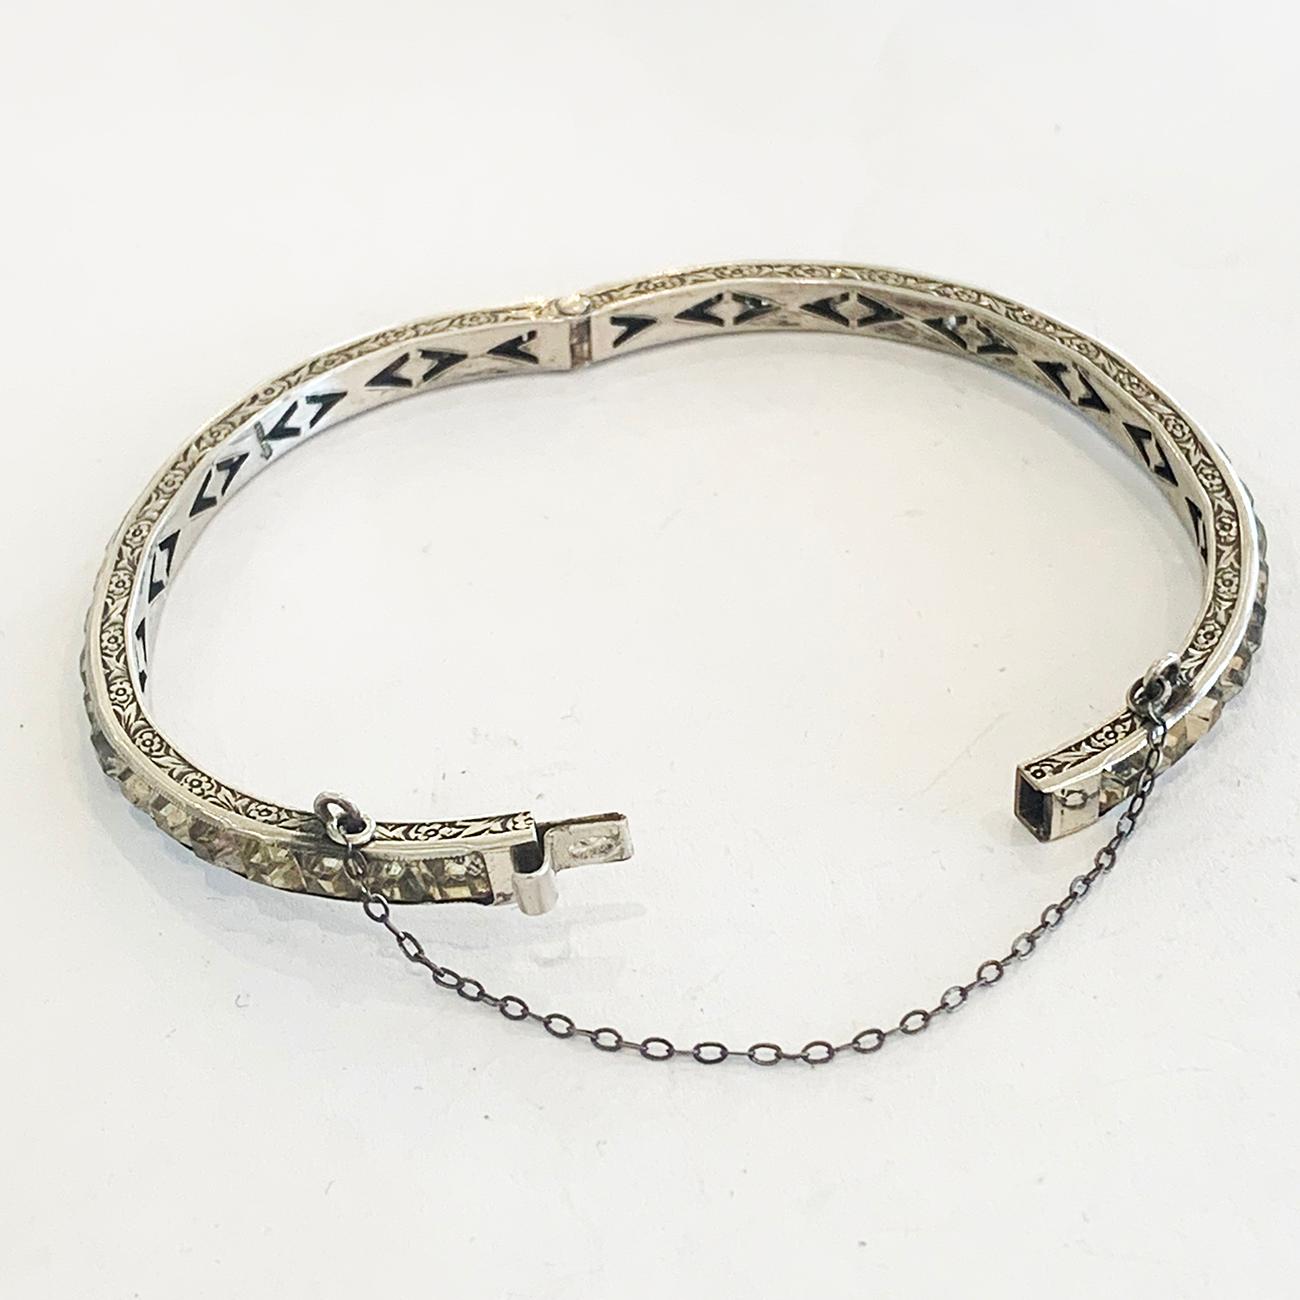 Art Deco Bangle in Sterling Silver carved to both sides in a fine Flower and Leaf decoration, Channel set with white Paste Gems to the whole perimeter, with original clasp and Safety Chain. All in excellent order with no damage or losses, soft age